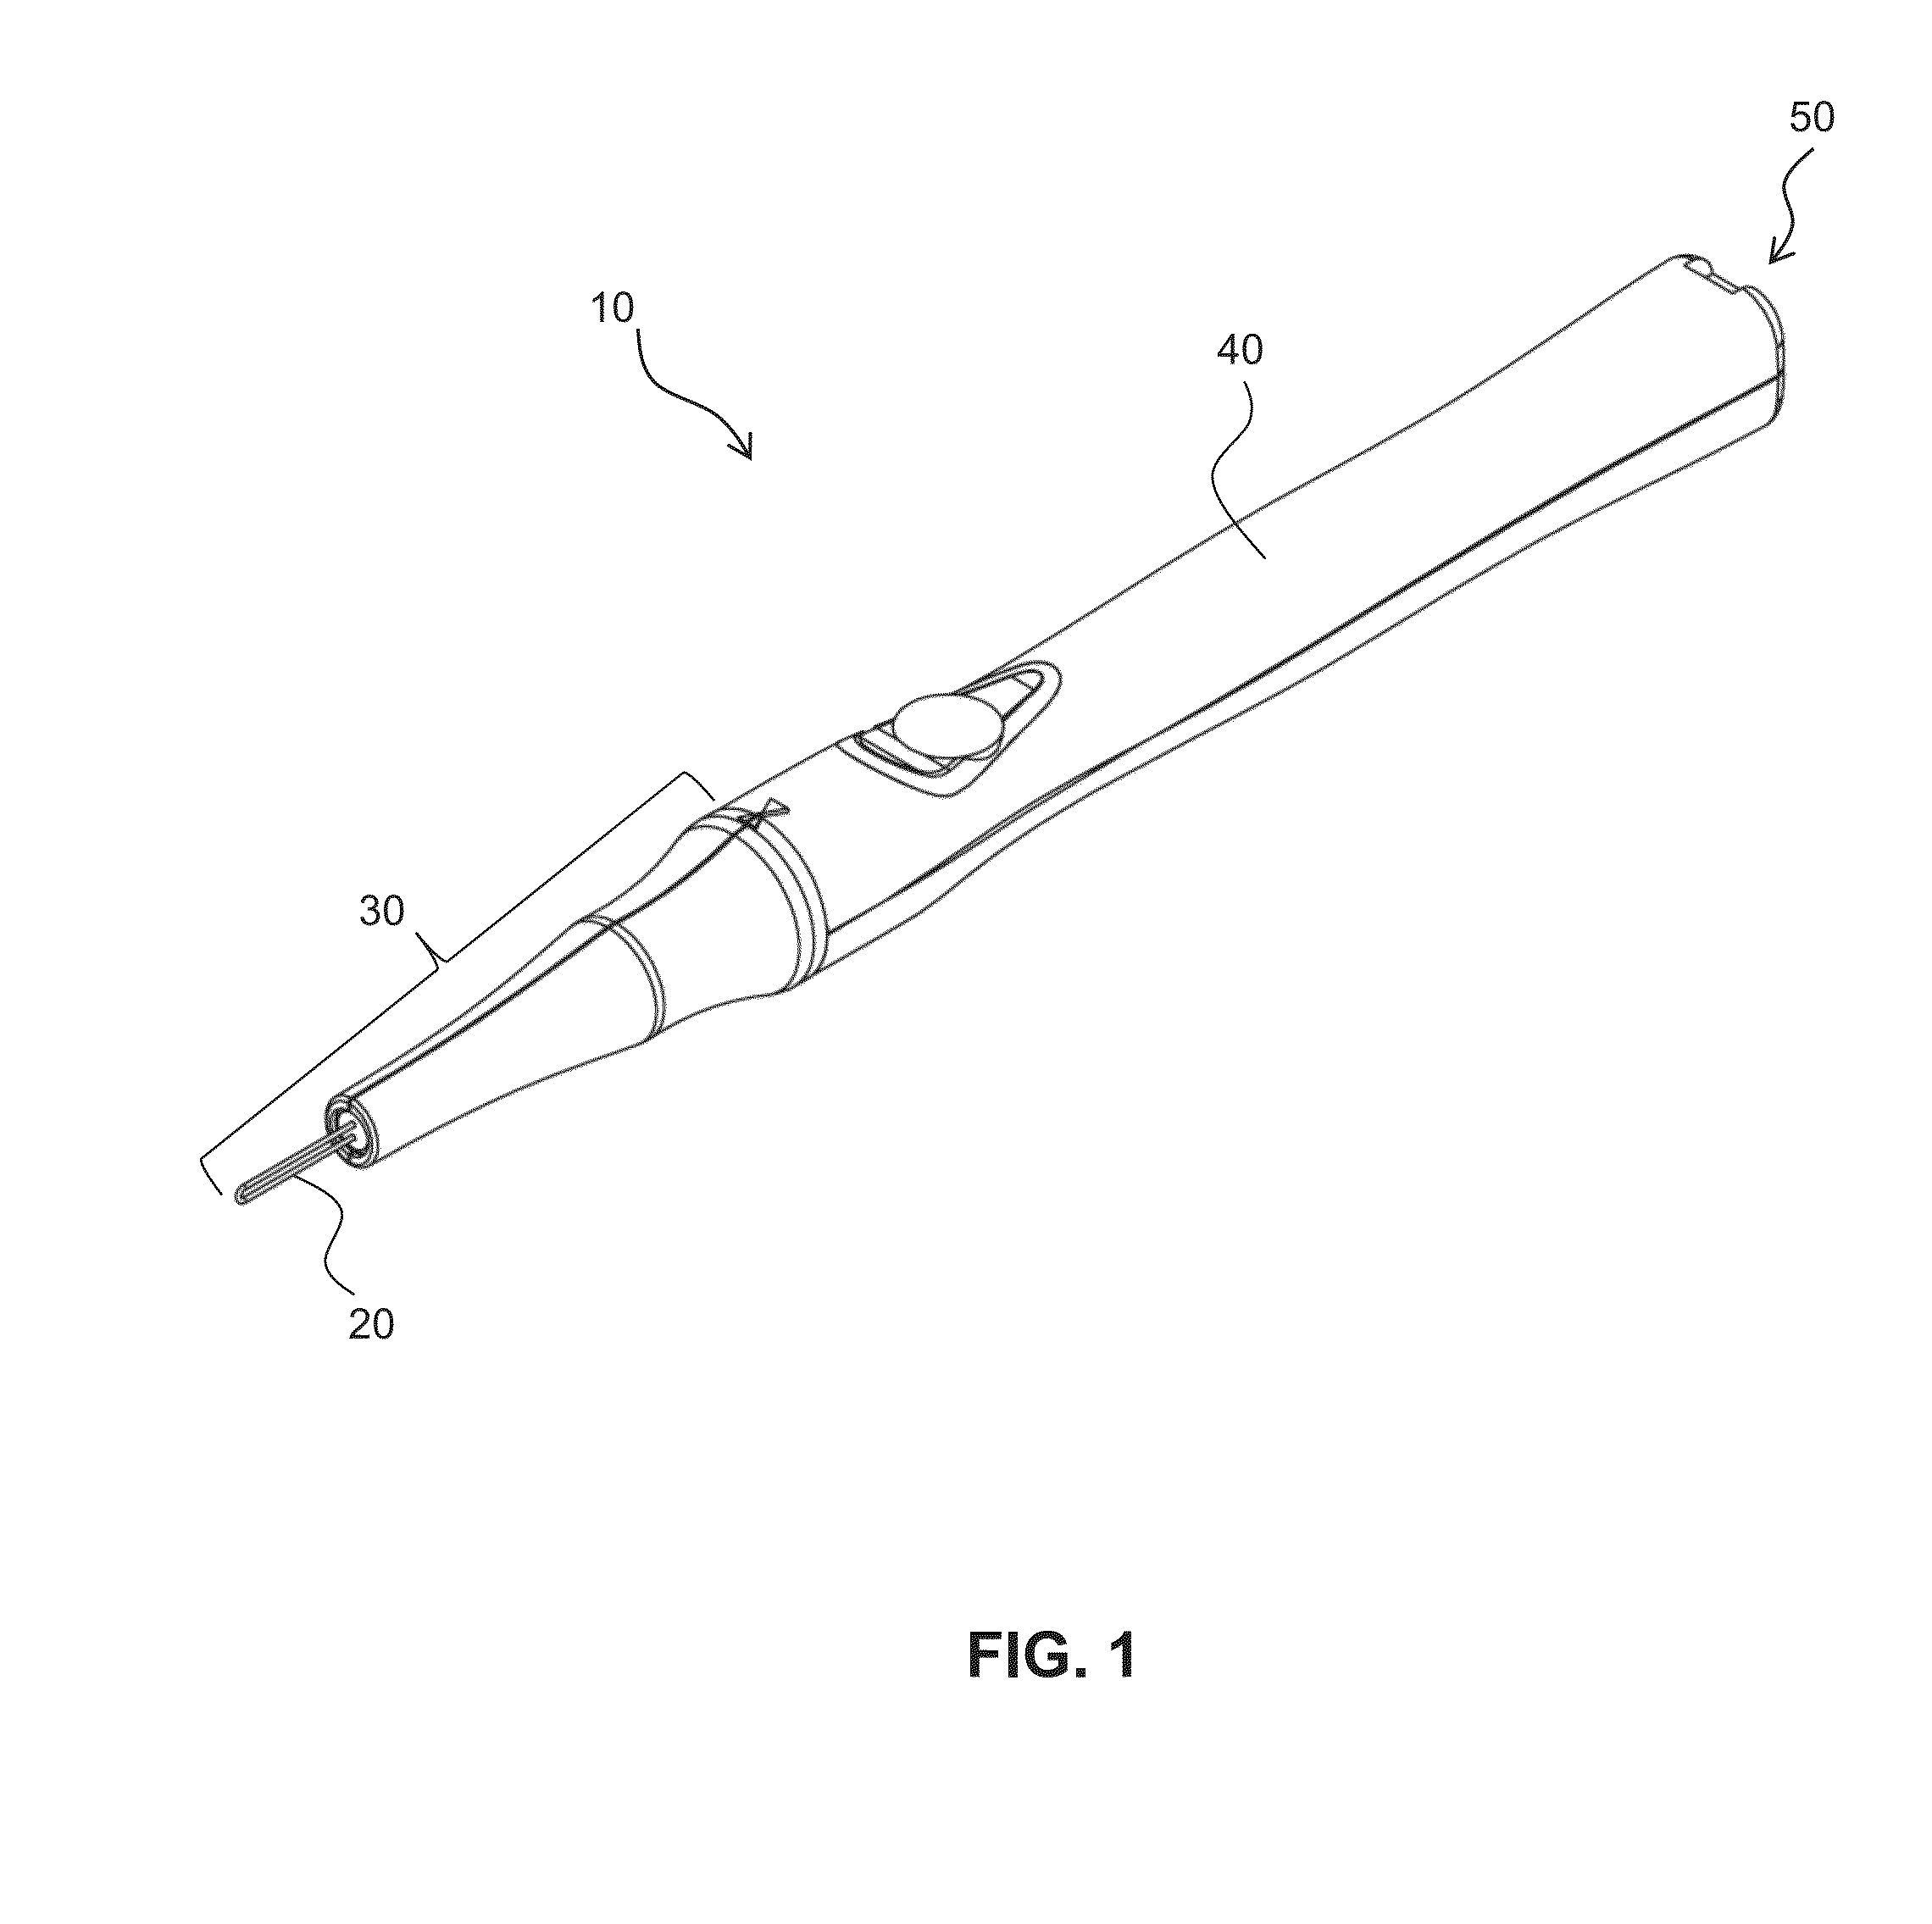 System and method for cooling of a heated surgical instrument and/or surgical site and treating tissue